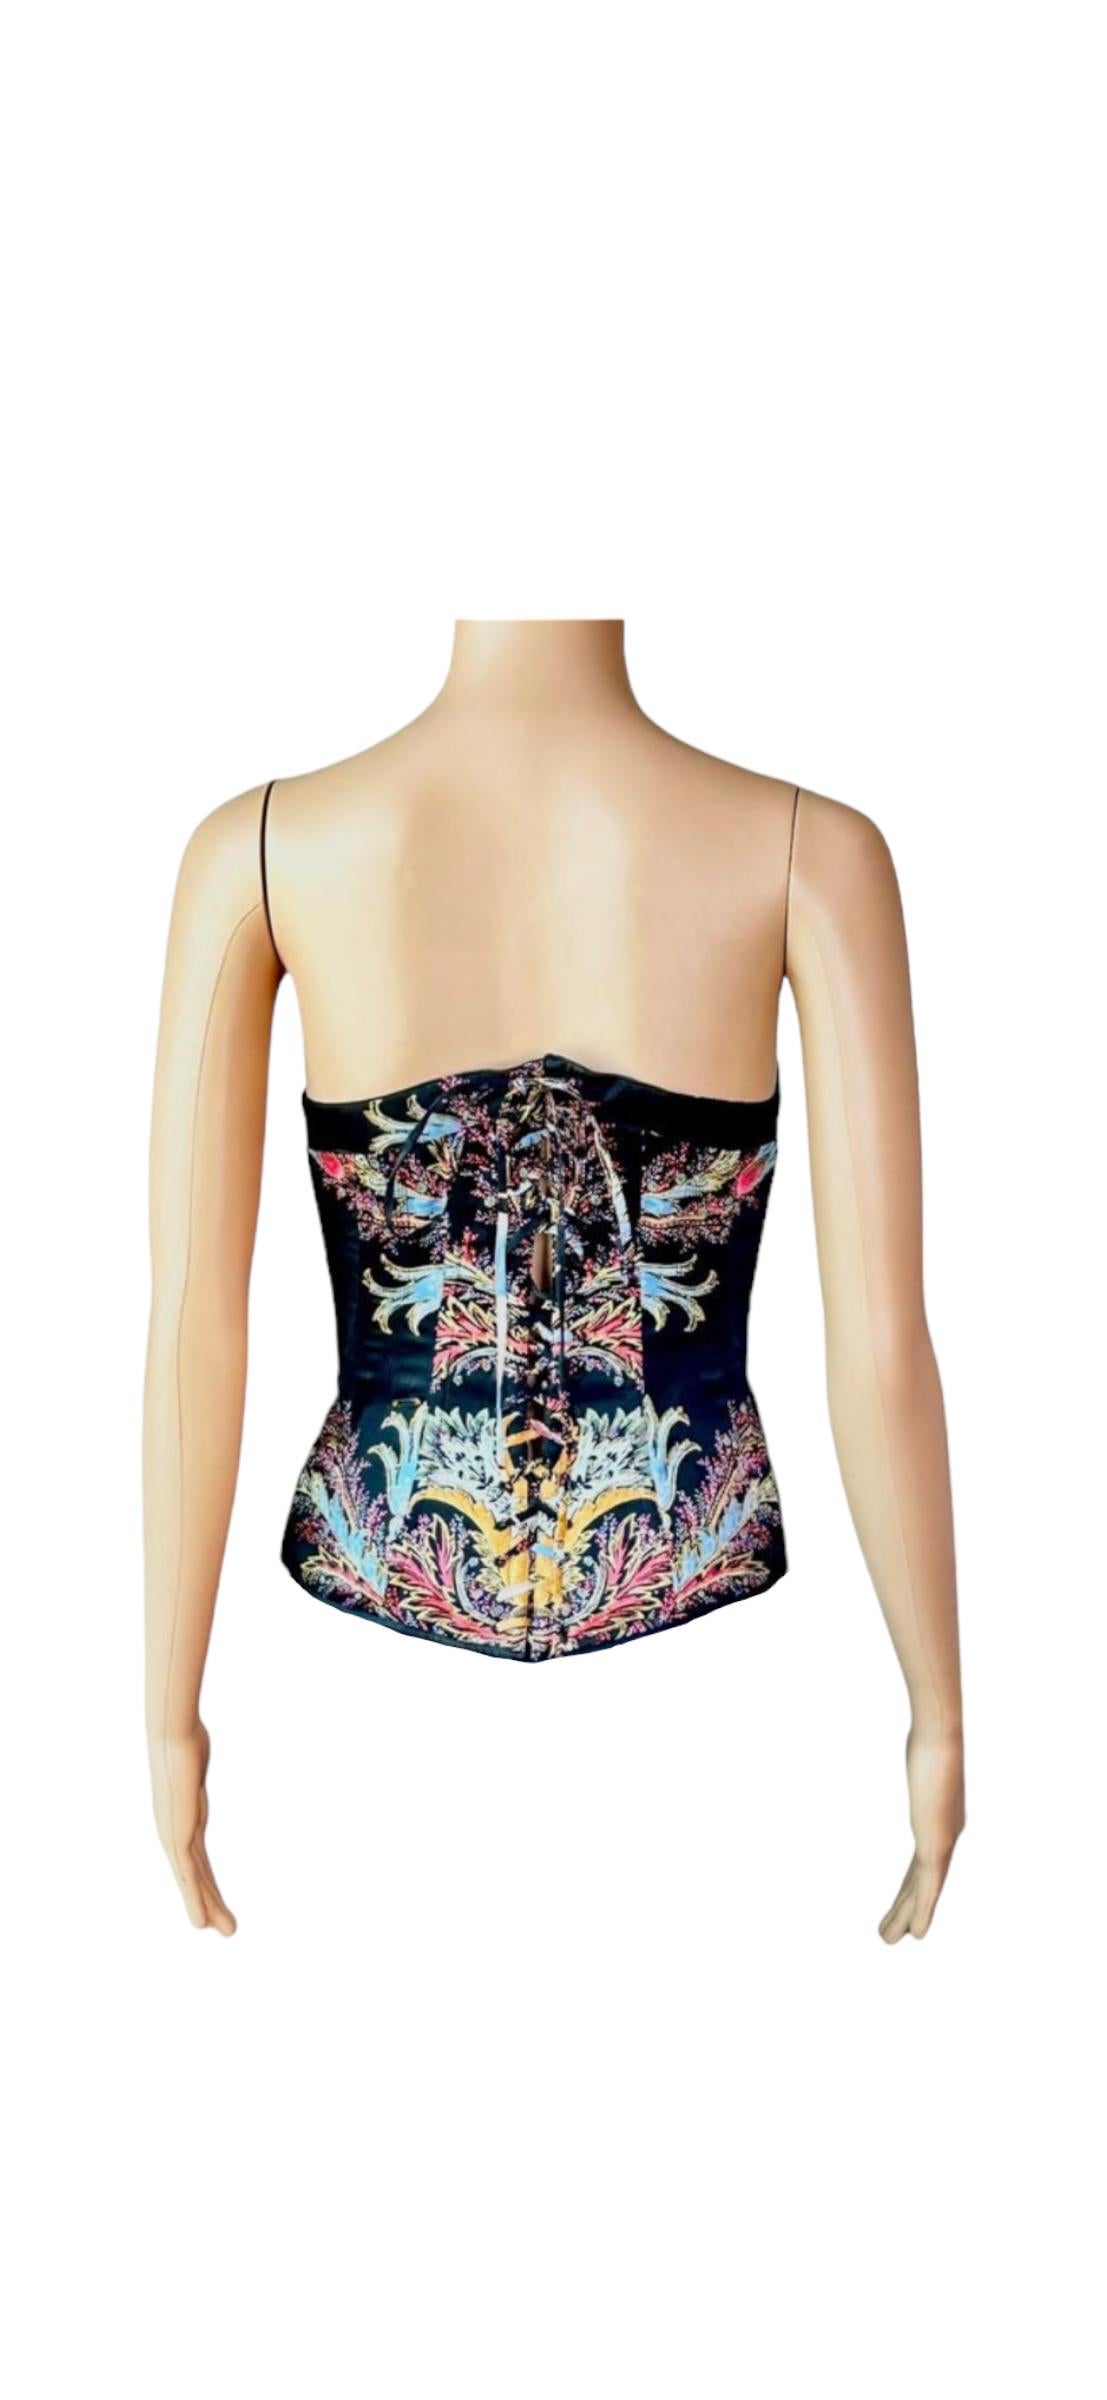 Roberto Cavalli F/W 2004 Bustier Corset Top

Please note size tag has been removed item fits like a size L but is highly adjustable due to corseted tie up in the back.

FOLLOW US ON INSTAGRAM @OPULENTADDICT
